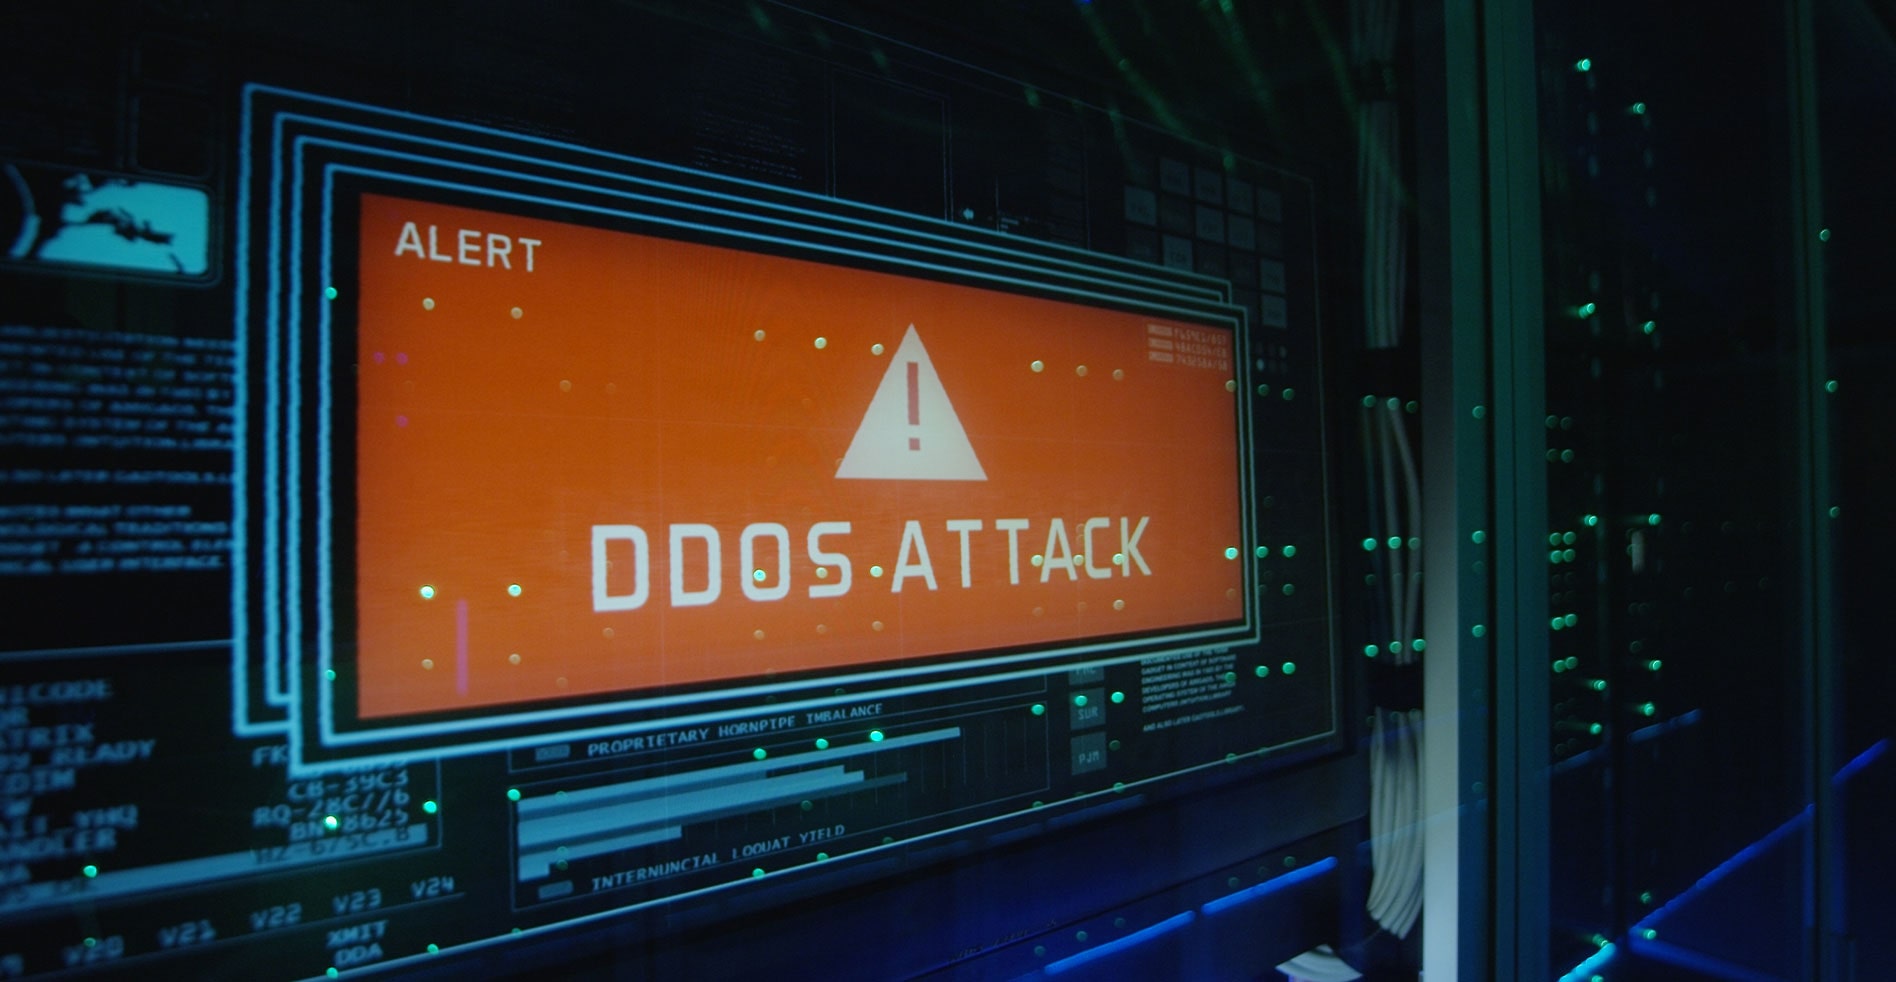 ddos attack on business's device